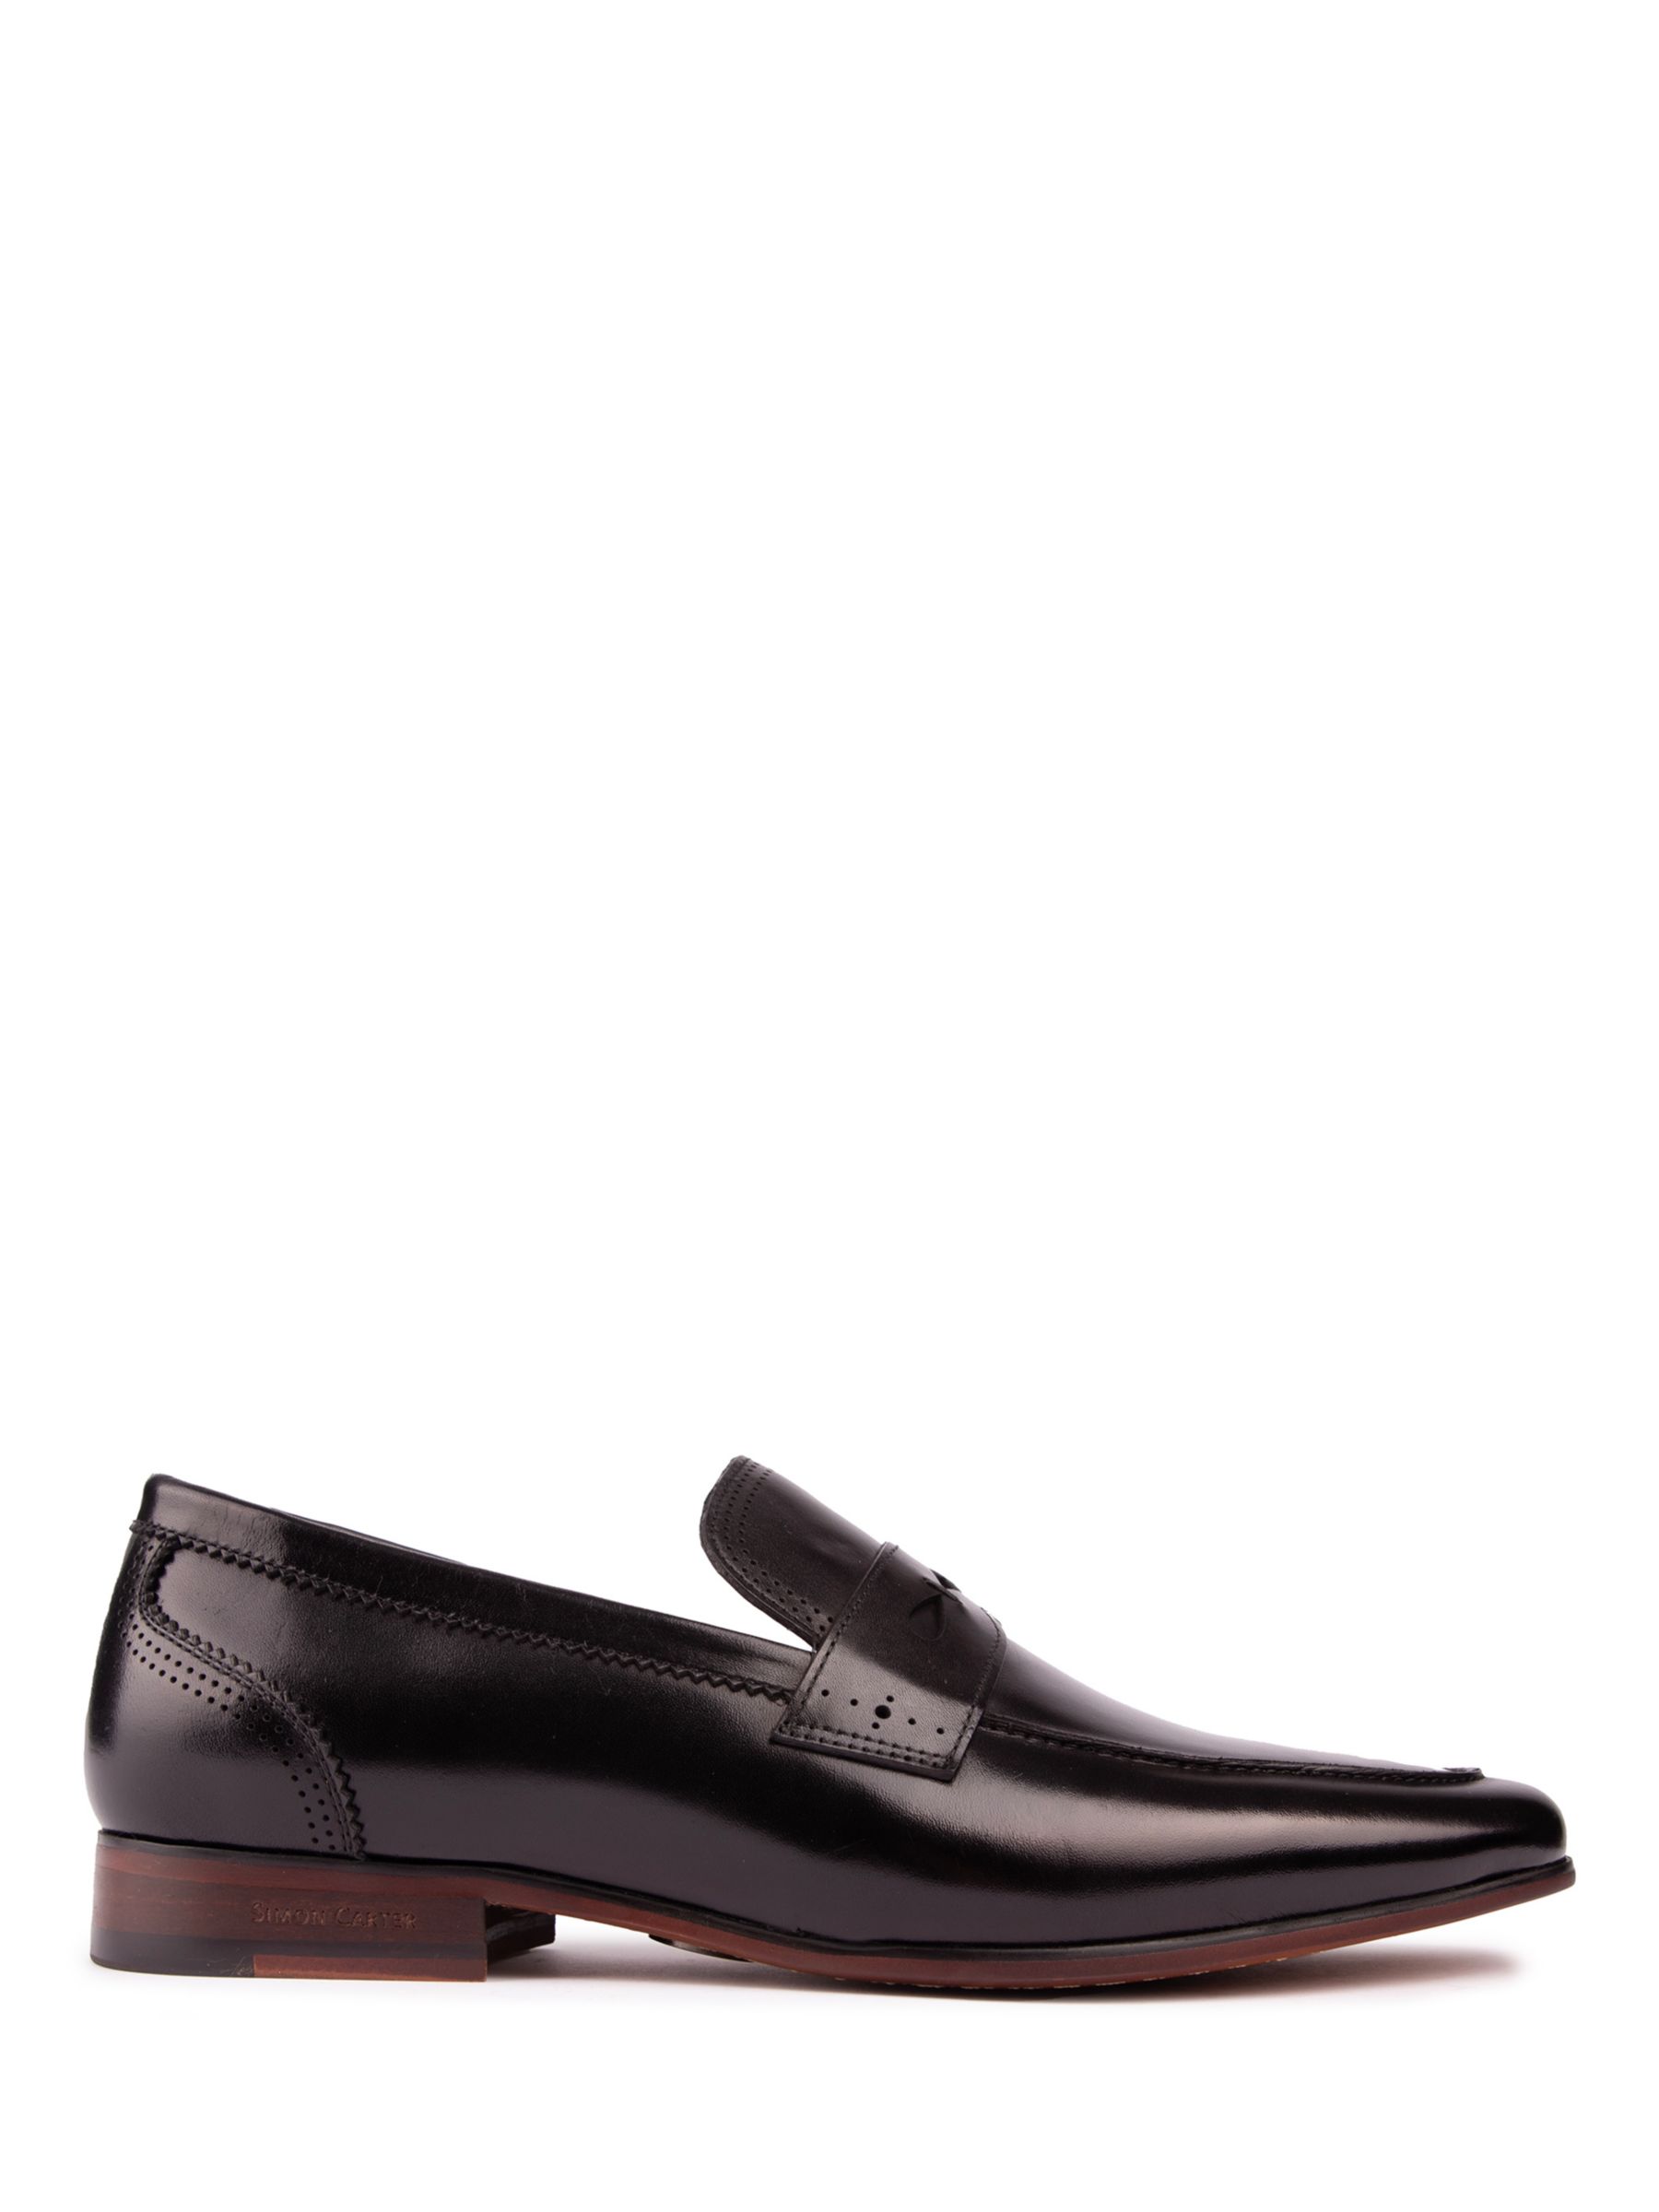 Simon Carter Pike Leather Loafers, Black, 11